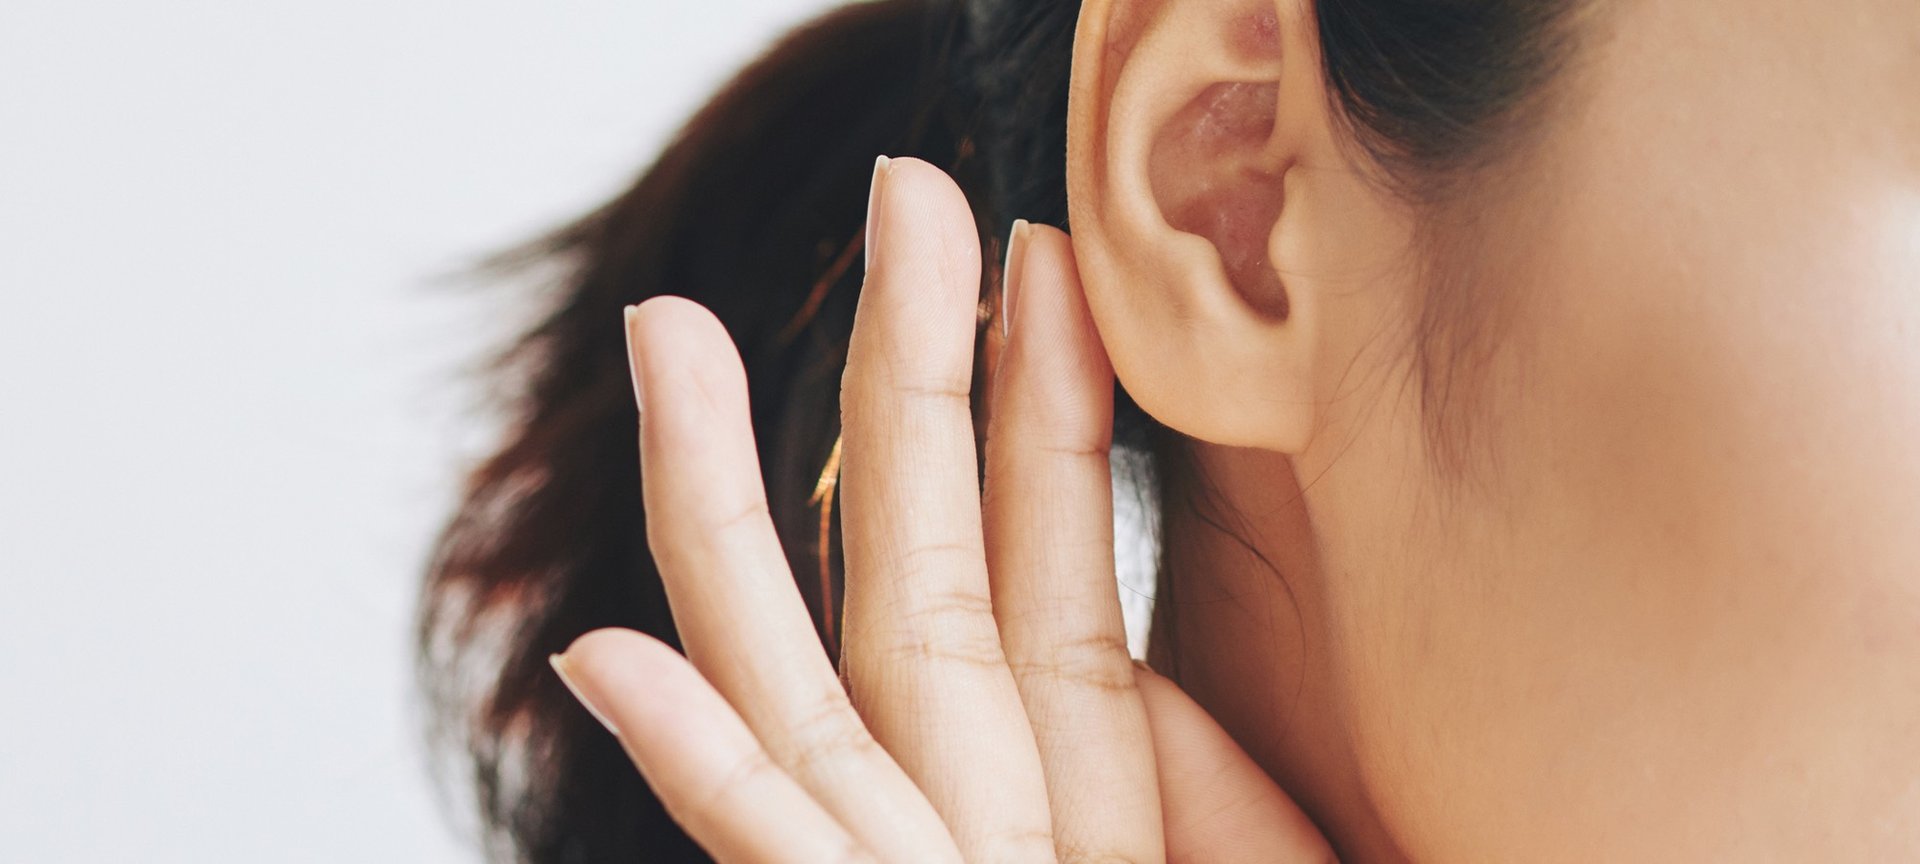 How To Prevent Ear Pimples